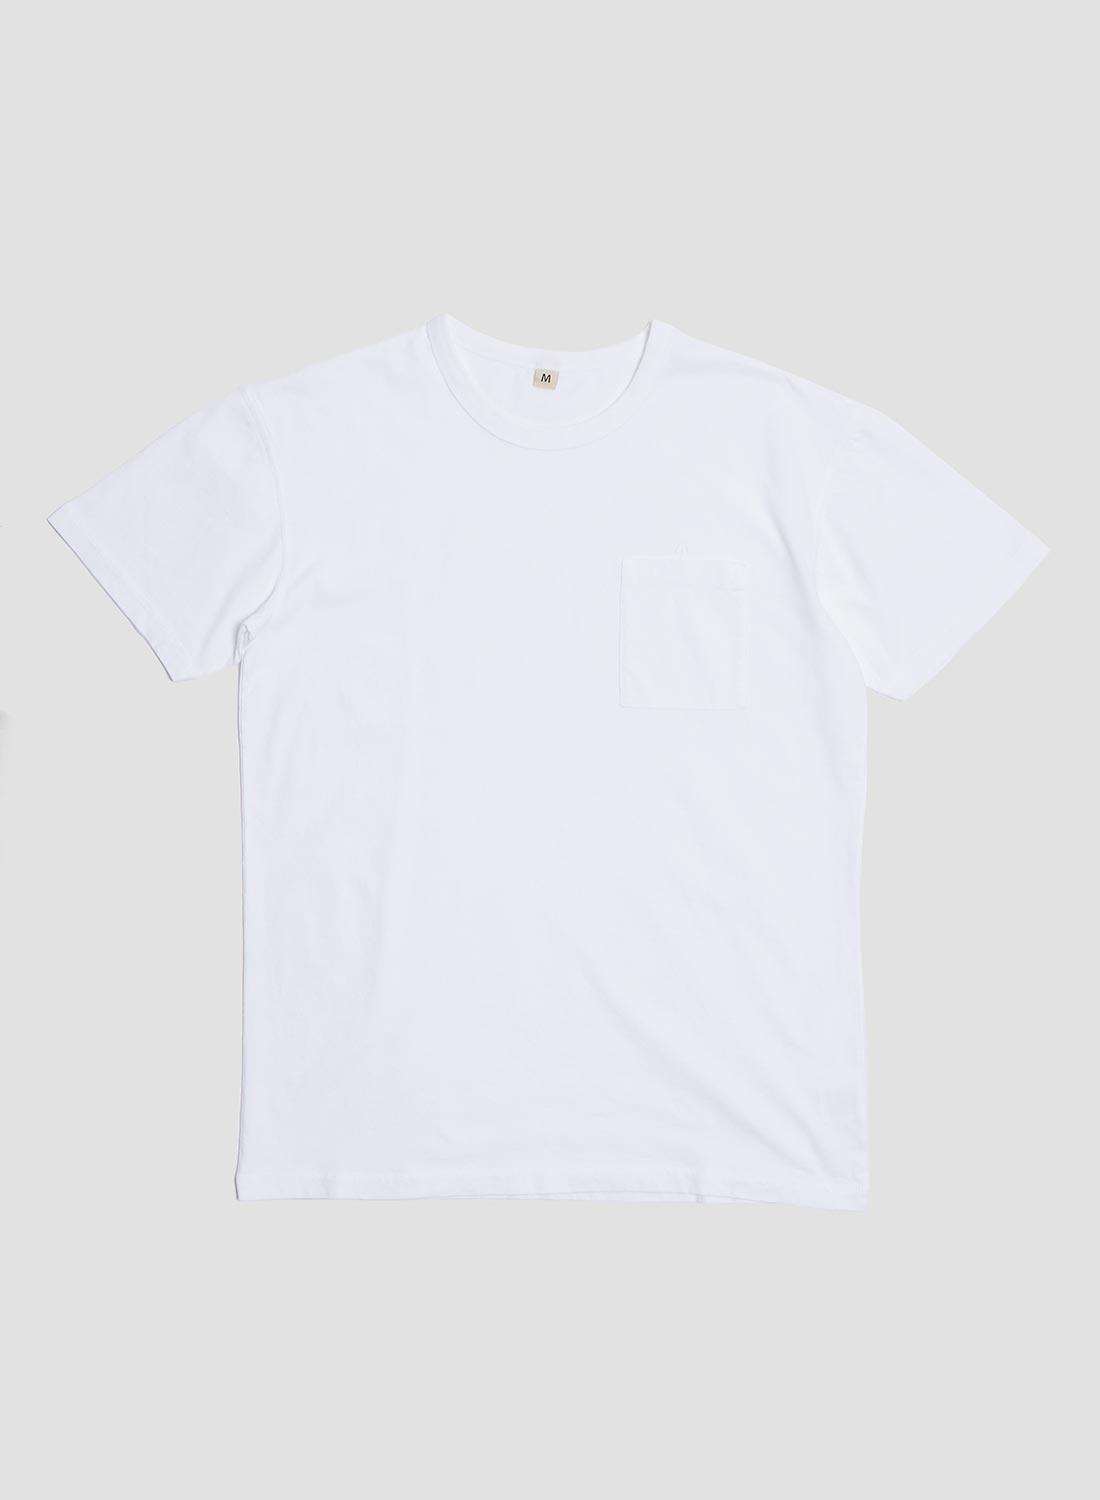 Classic Pocket Tee in White - 1